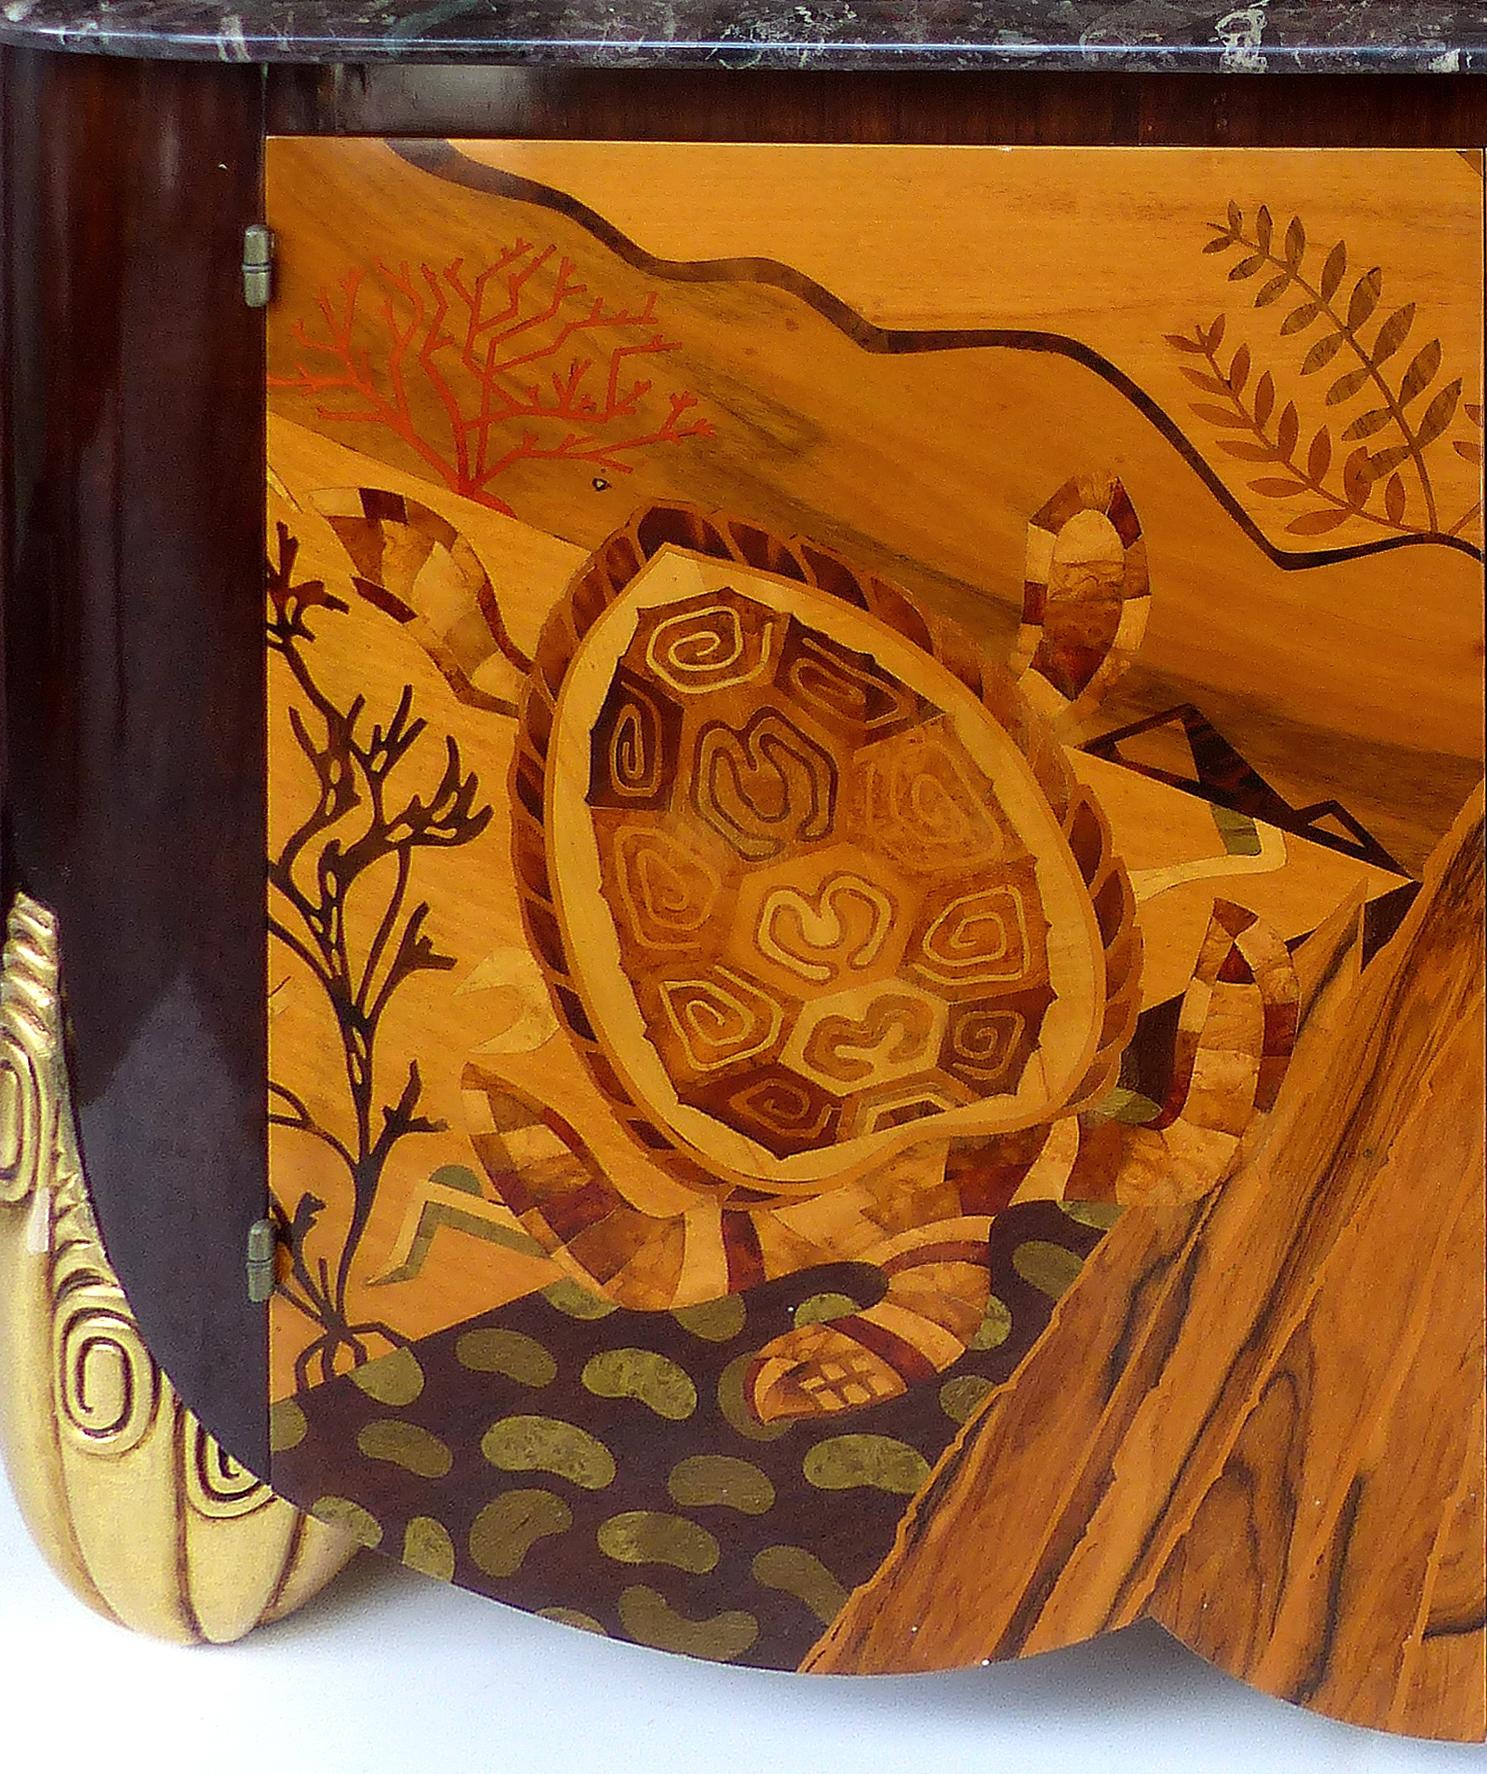 Italian Art Deco Style Marble-Top Cabinet with Marquetry of Sea Turtles

An Art Deco style marble-top two-door cabinet. The two doors have intricate marquetry depicting an underwater scene with sea turtles and coral. This cabinet is in the style of